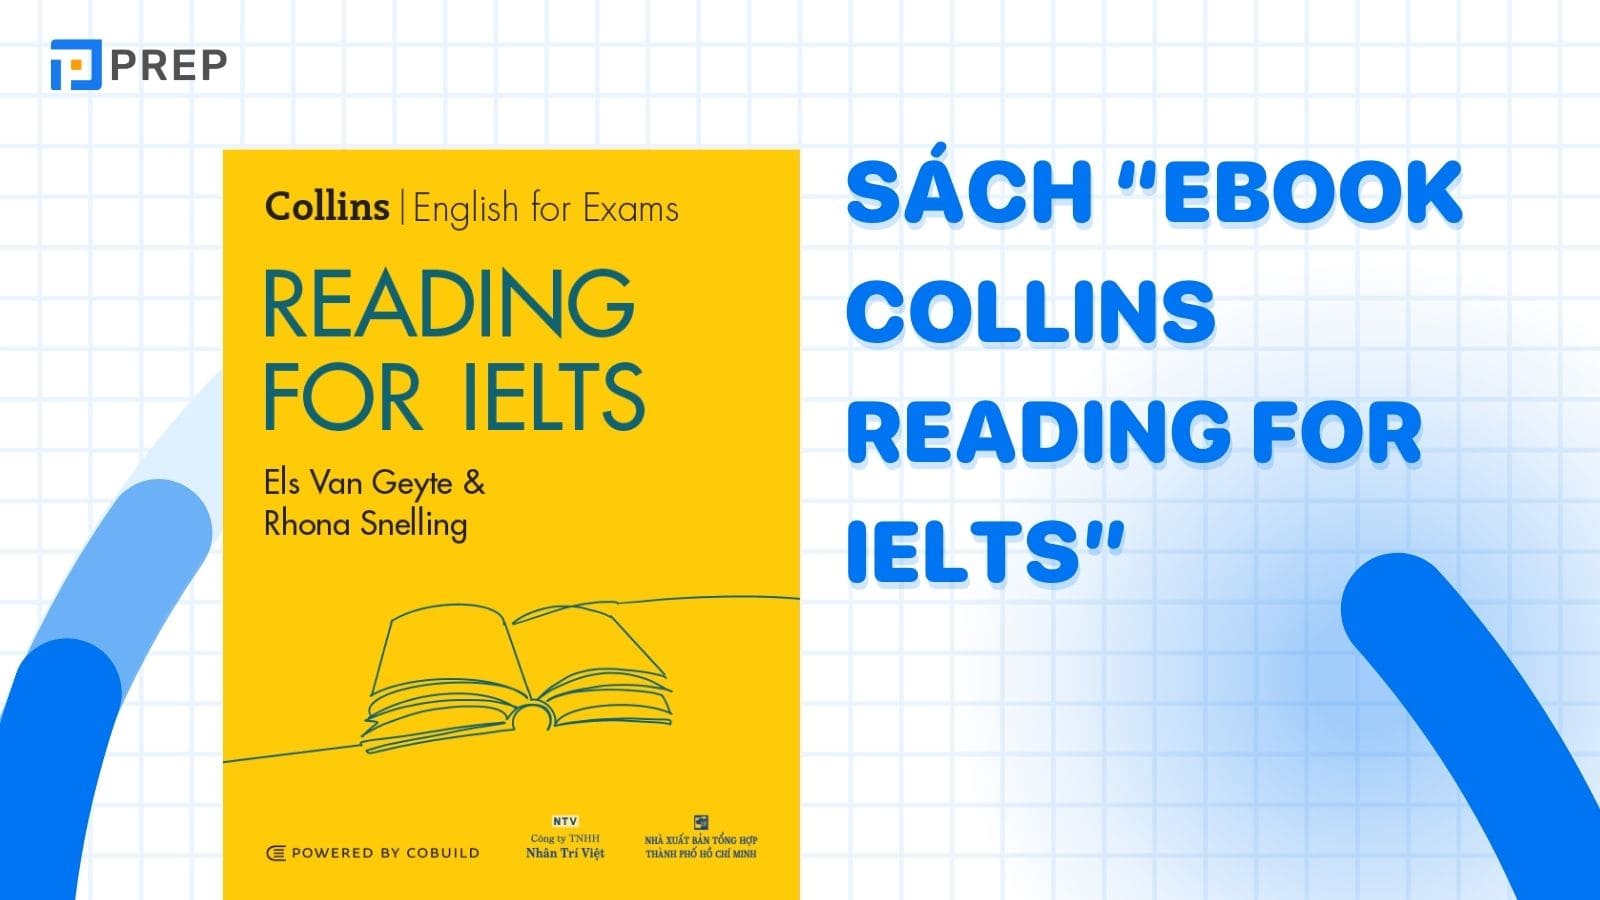 collins-reading-for-ielts.jpg